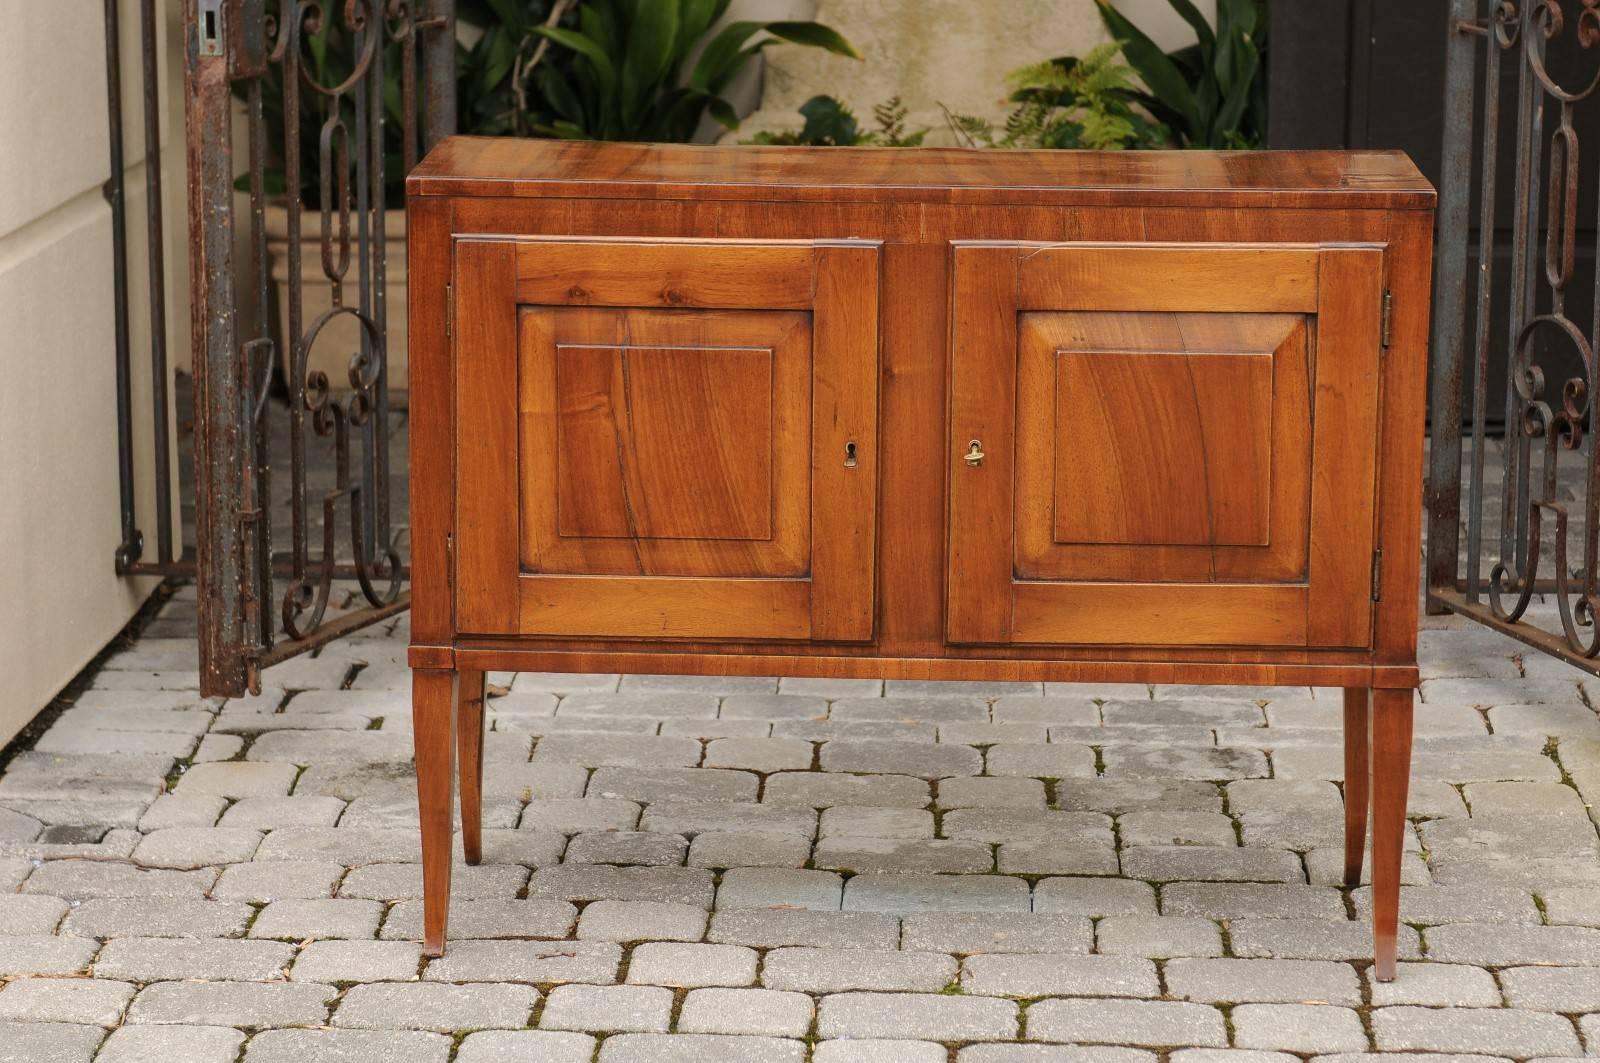 An Italian walnut or fruitwood veneered two-door credenza with slightly curved legs from the early 20th century. This Italian two-door buffet features a rectangular top sitting above two doors adorned with slightly raised panels. These doors open to